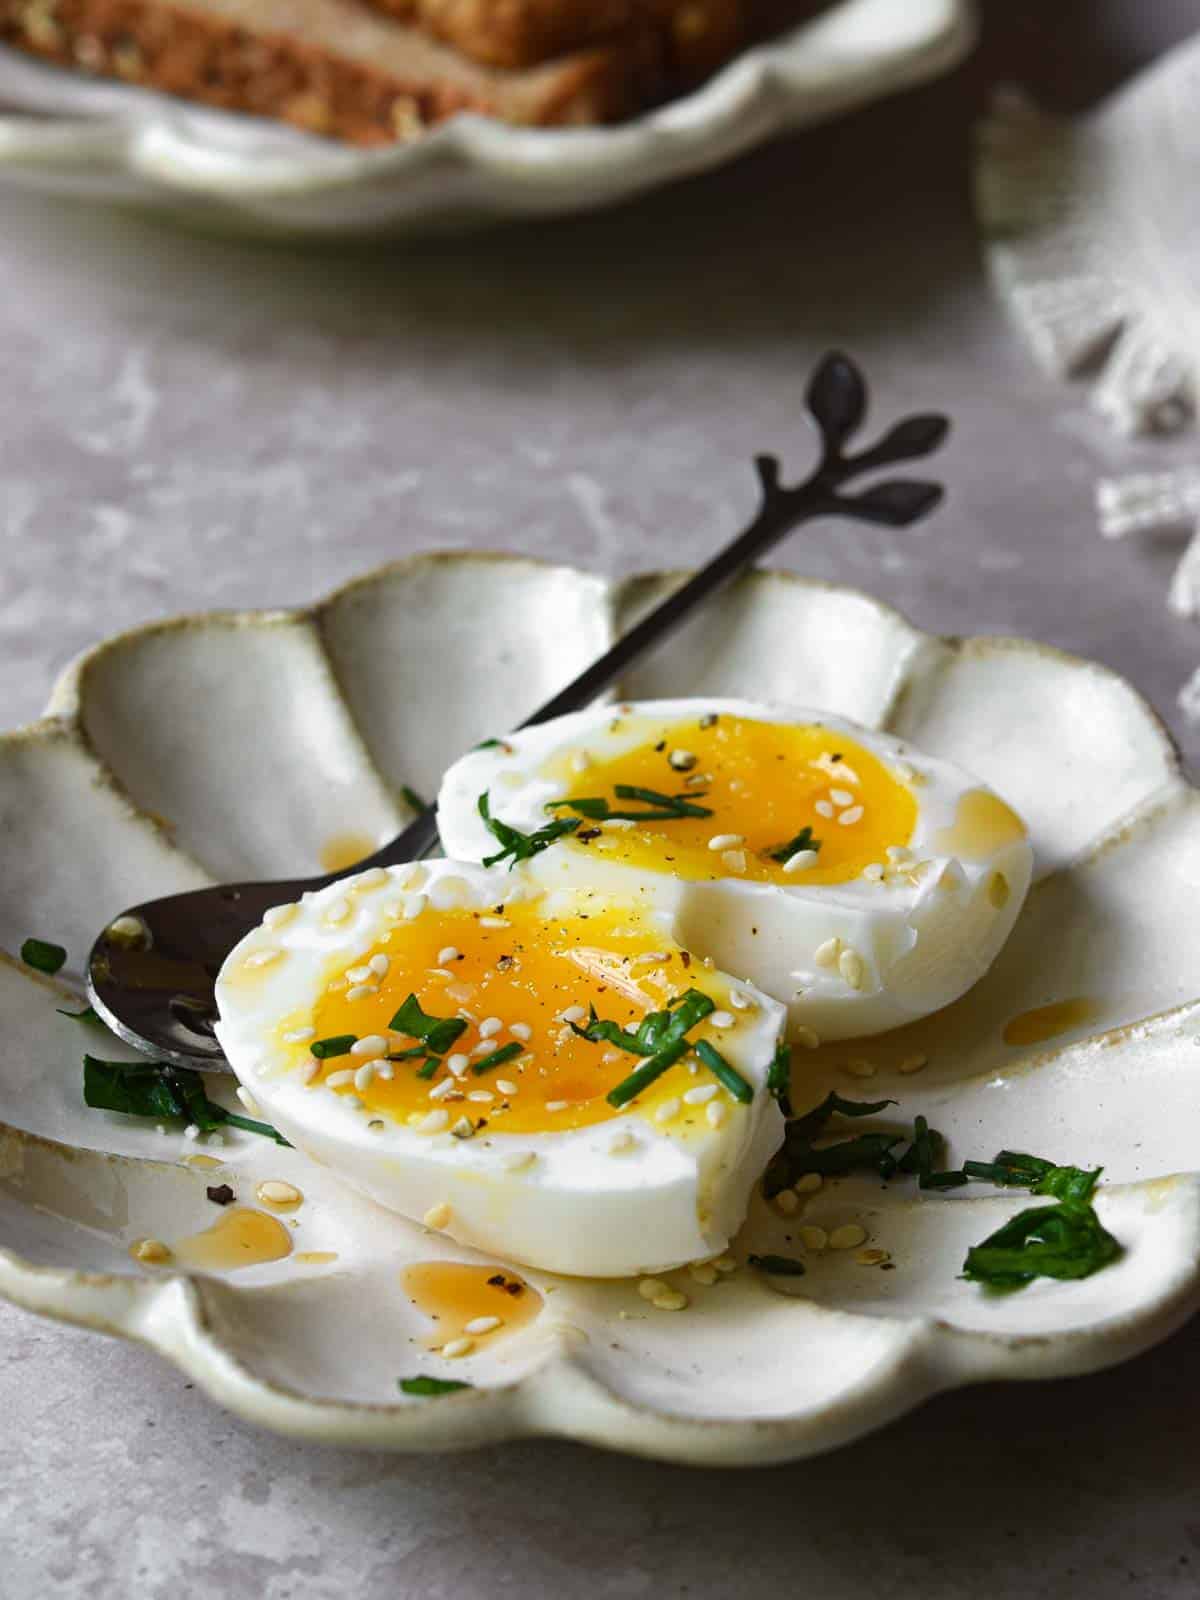 Soft-boiled eggs with sesame oil and toasted sesame seeds cut open on a beige dish.